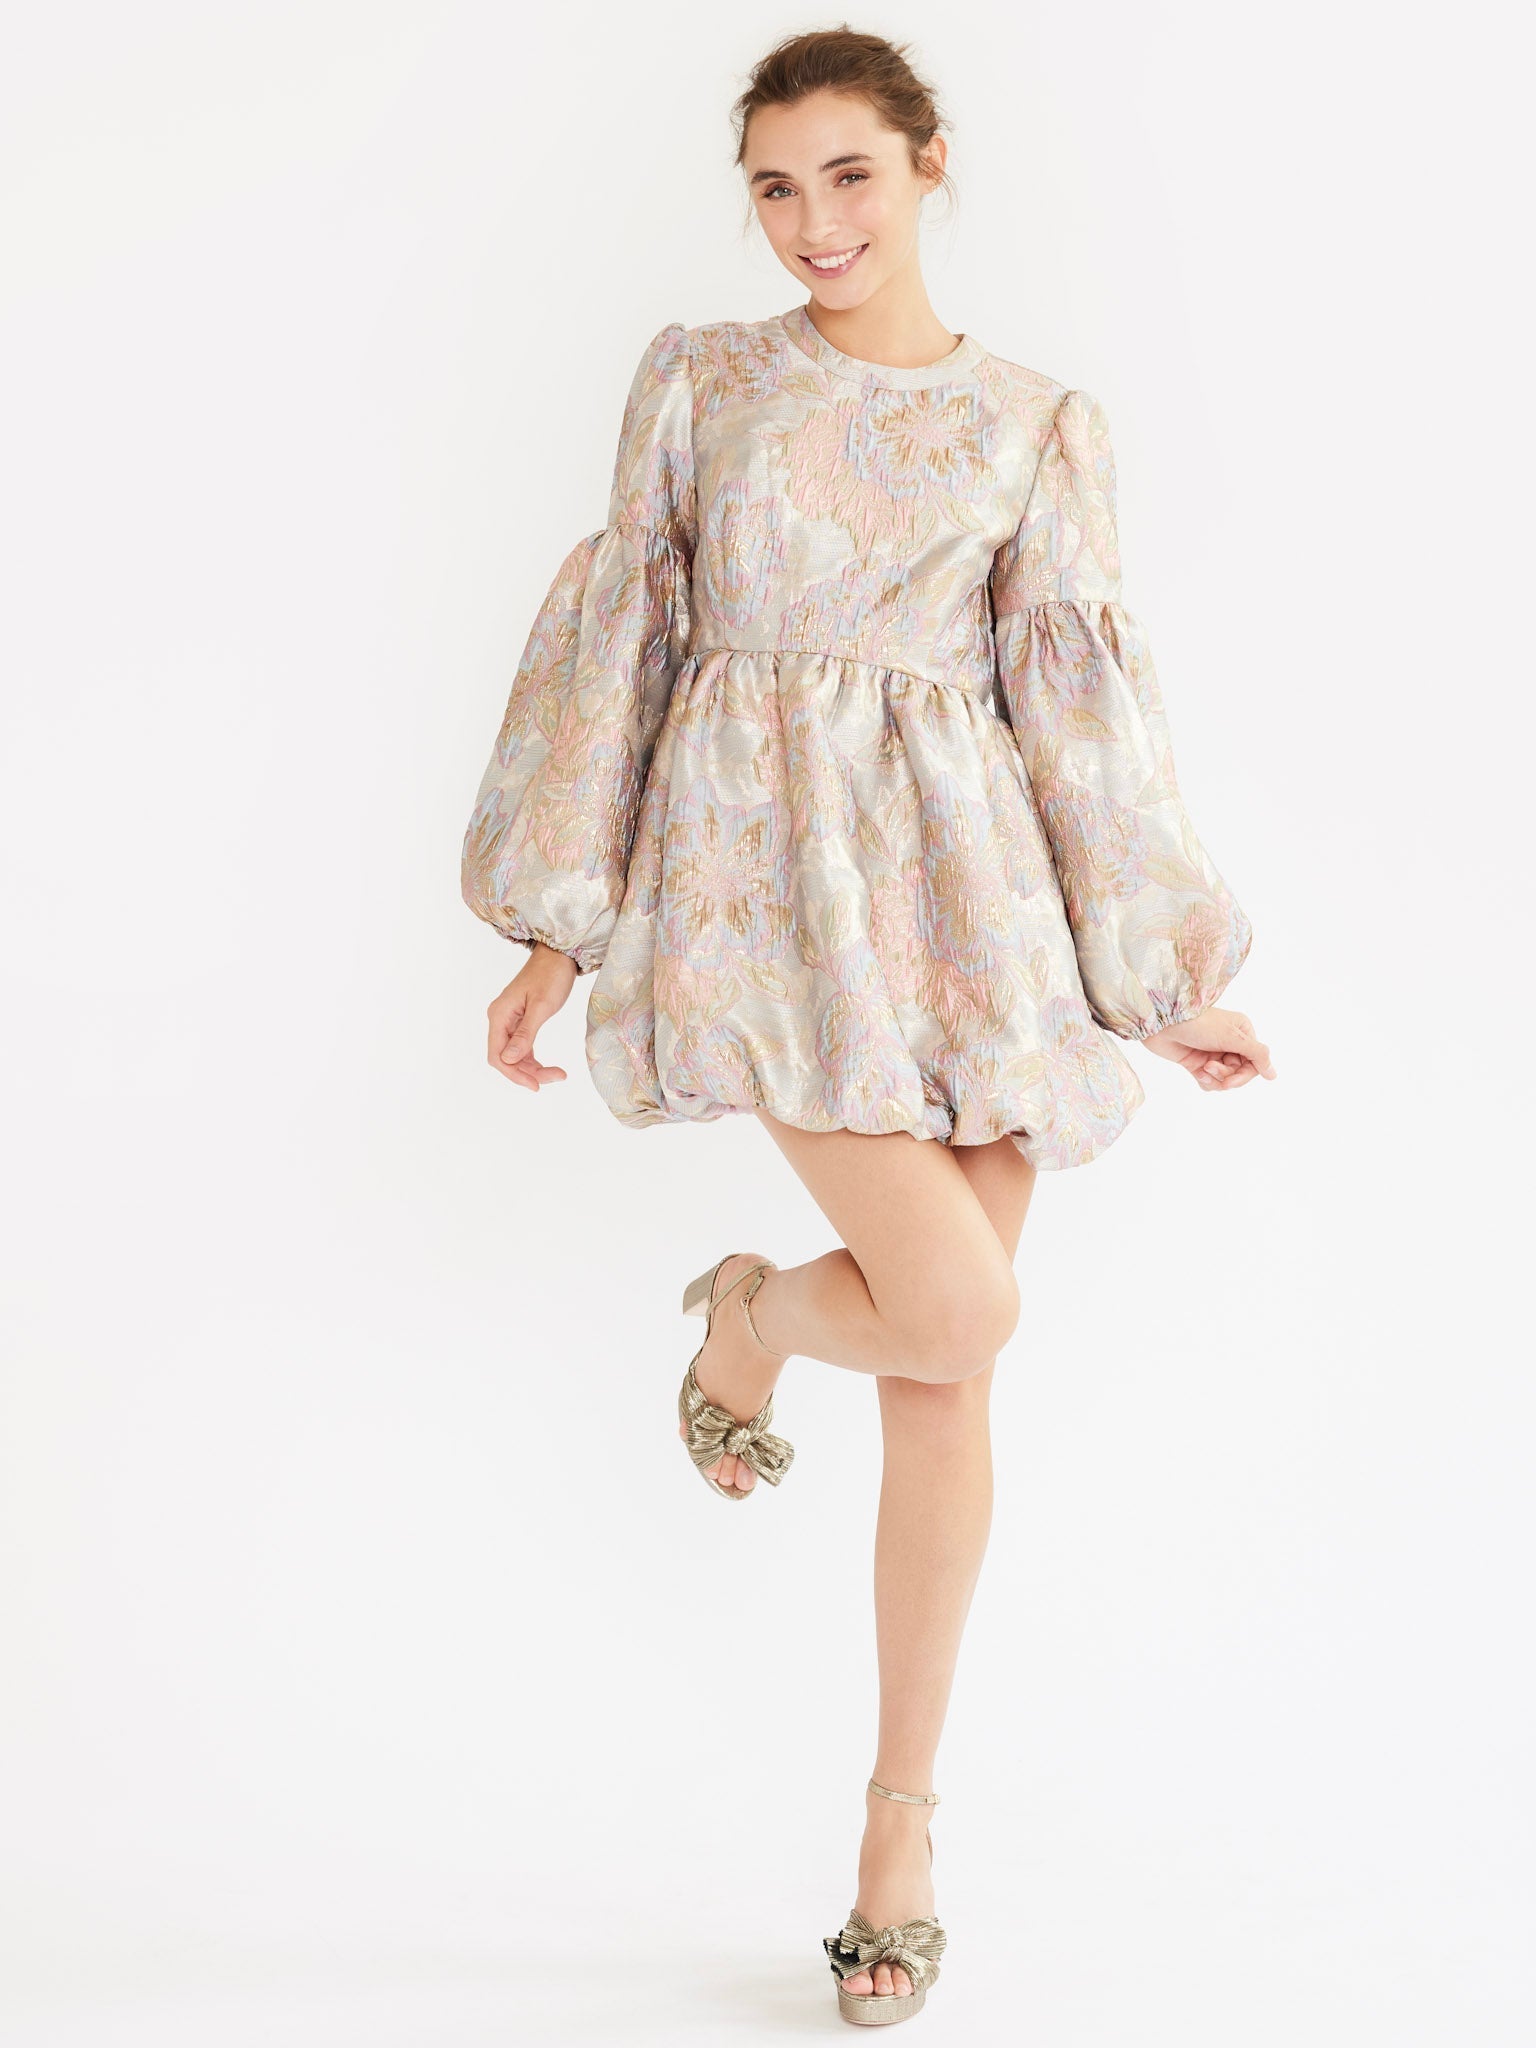 MILLE Clothing Giselle Dress in Pink Brocade